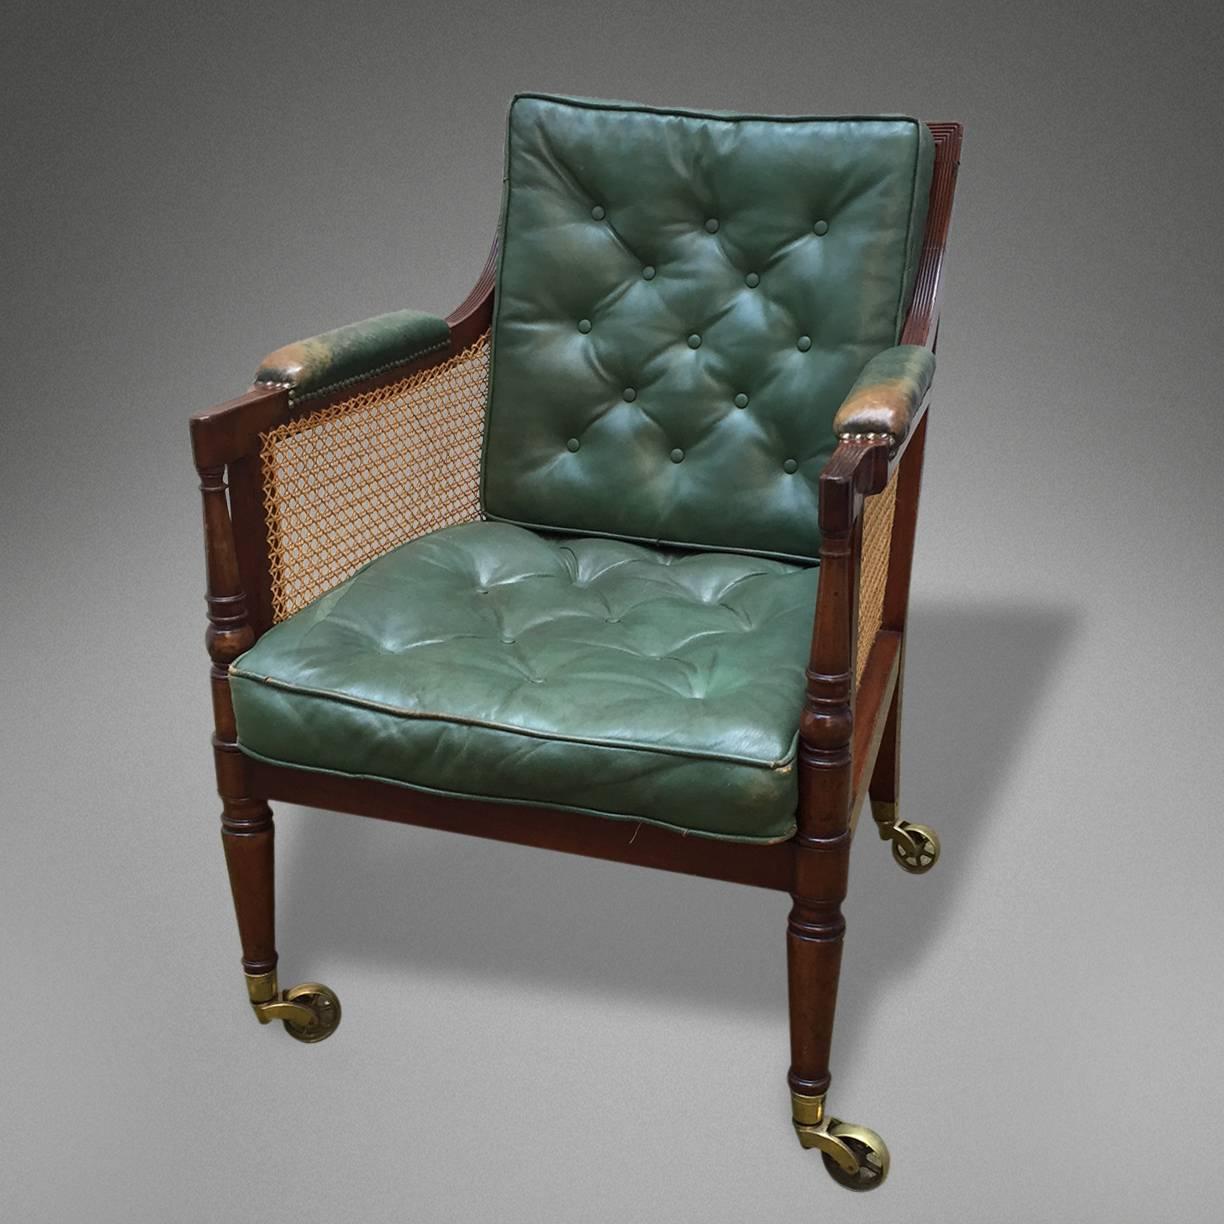 A pair of fine mahogany and cane armchairs.